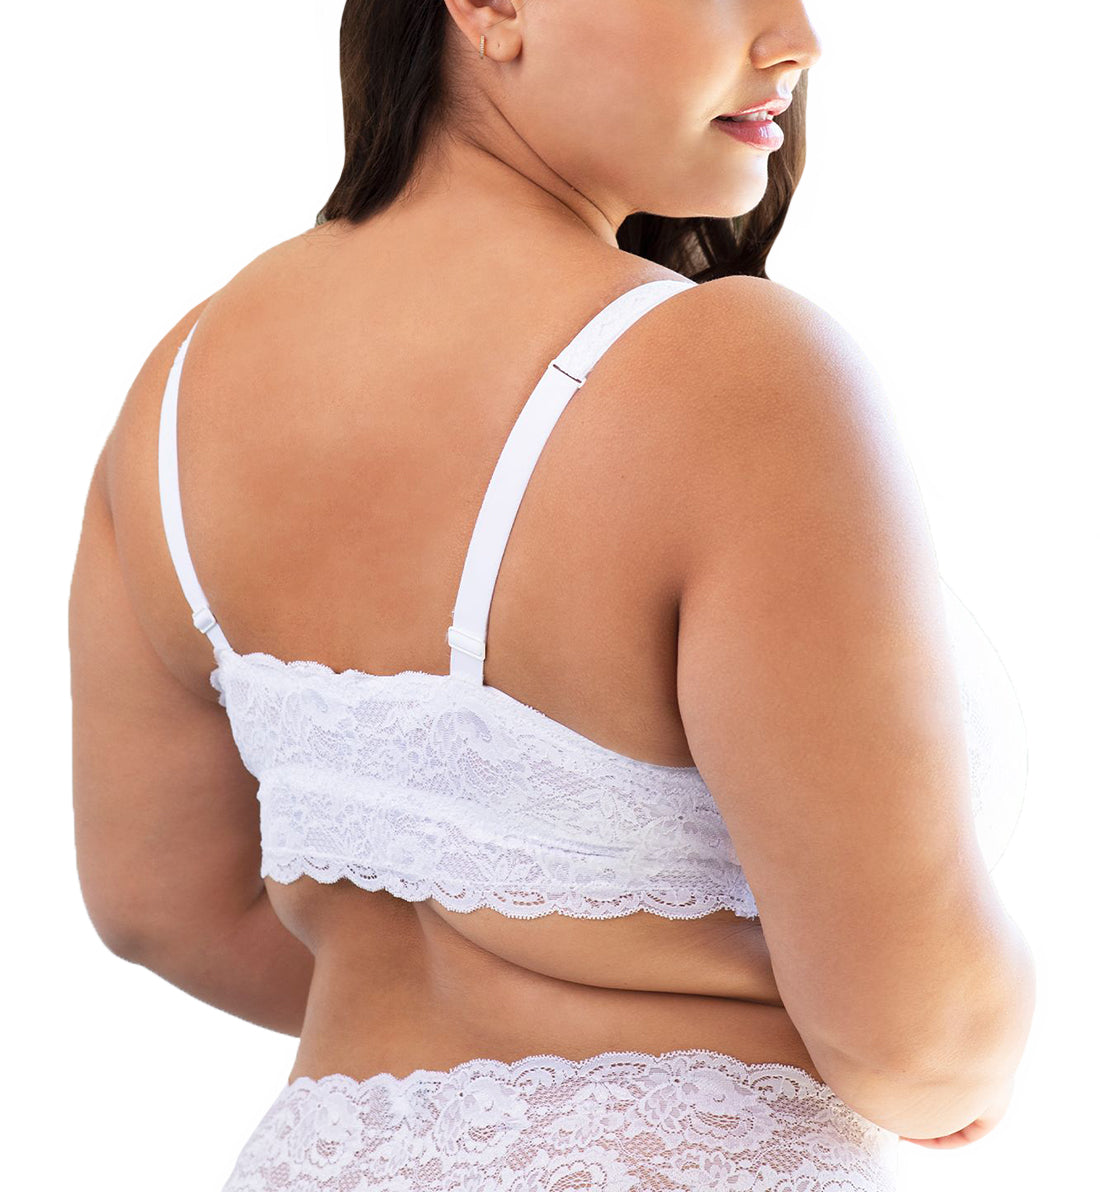 Cosabella NSN ULTRA CURVY Sweetie Bralette (NEVER1321),XS,White - White,XS